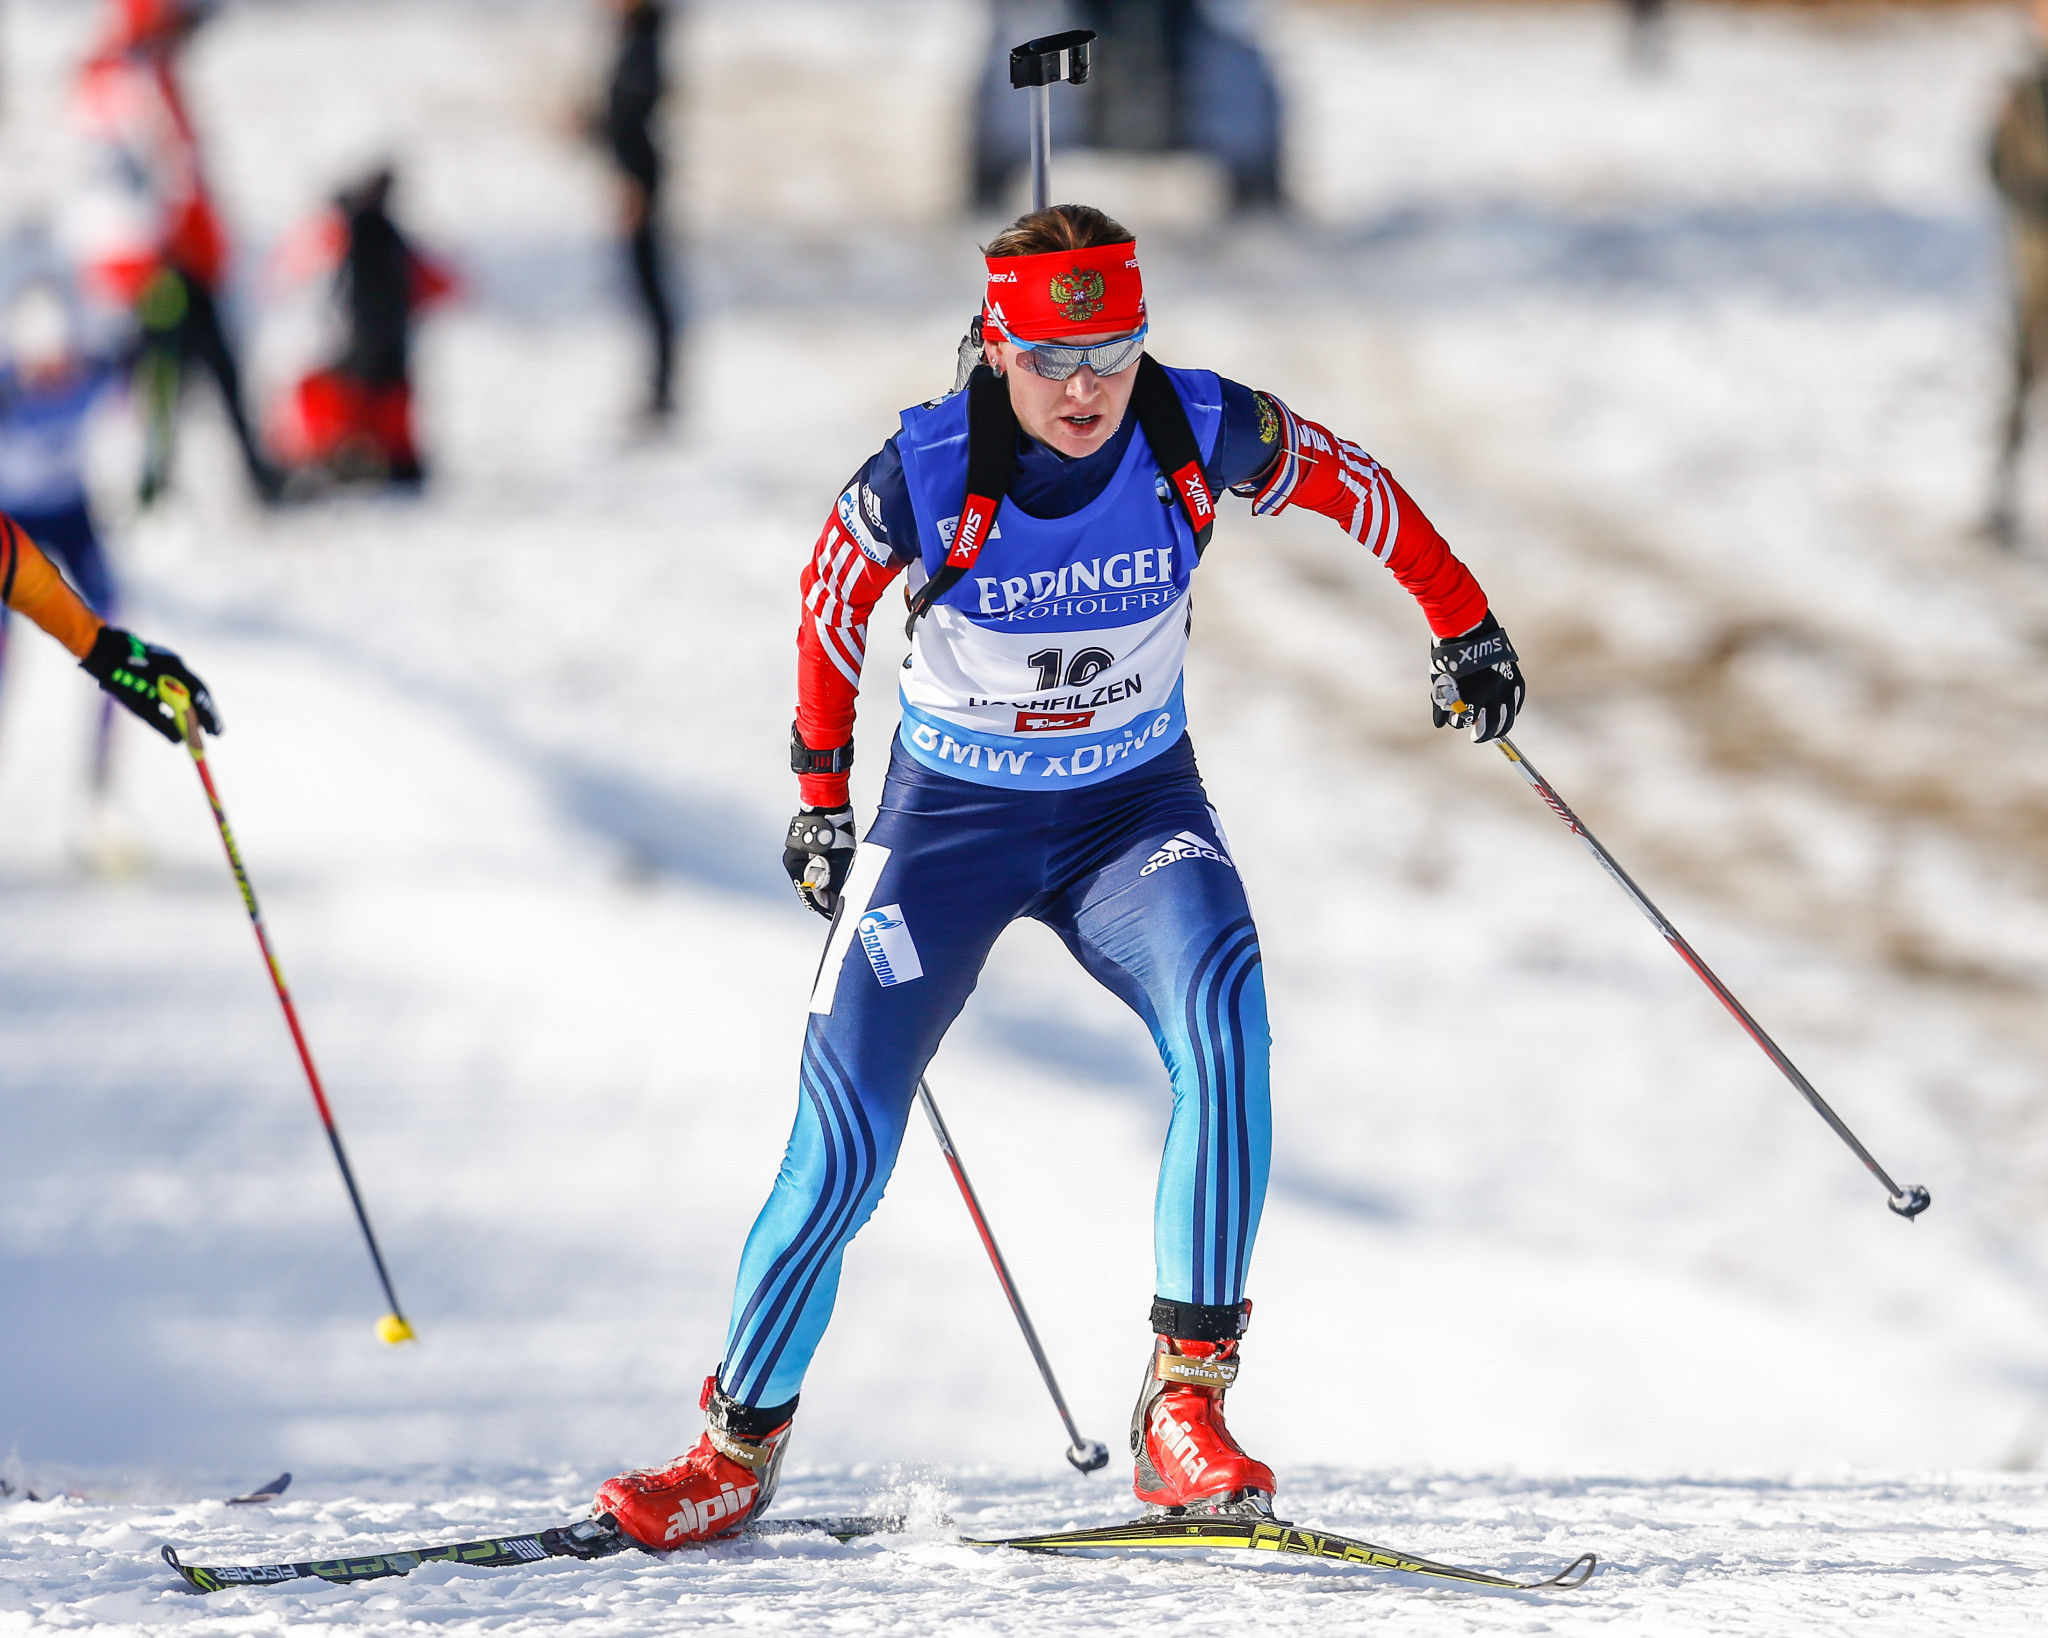 Biathlete banned following McLaren Report evidence withdraws appeal